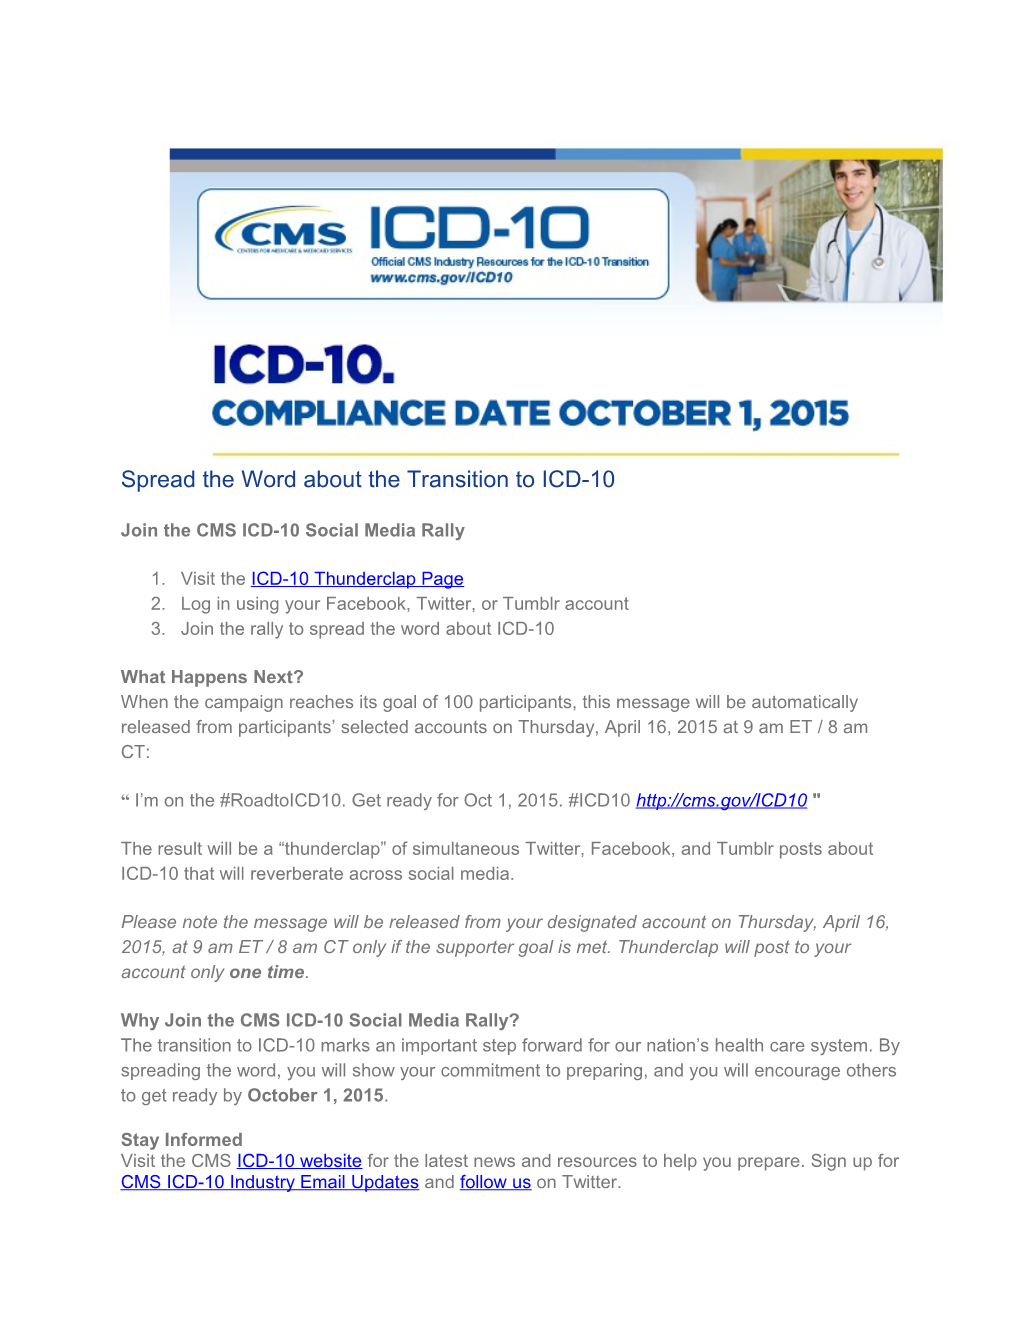 Spread the Word About the Transition to ICD-10